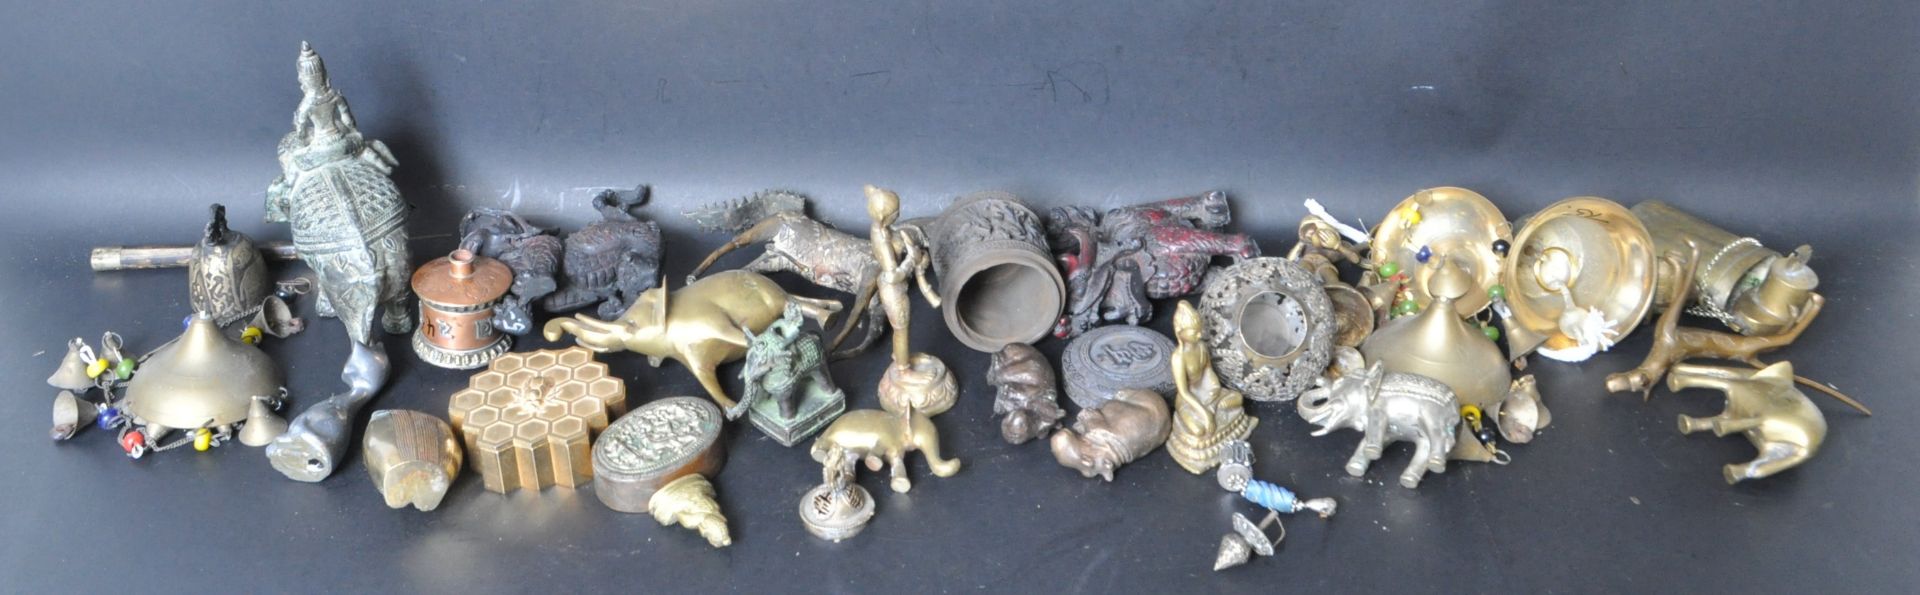 LARGE COLLECTION OF BRASS WARE AND HINDU FIGURINES - Bild 8 aus 9